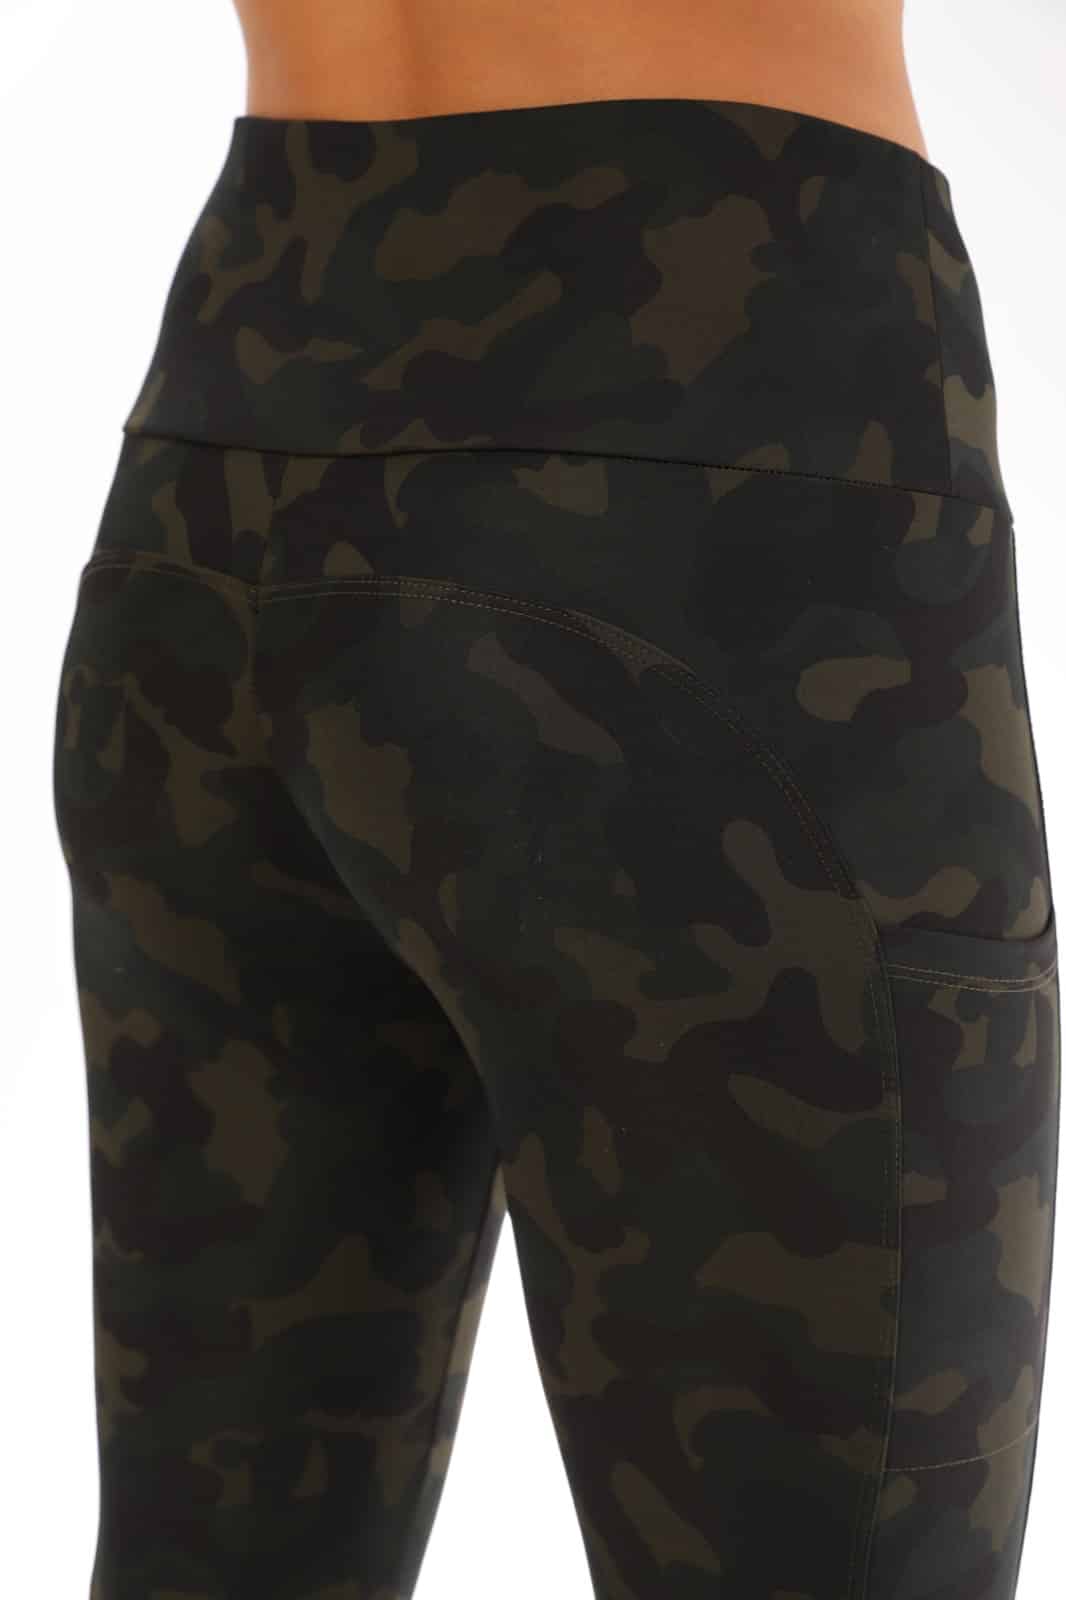 Stylish Green Camo Leggings with High Rise Waist and Pocket - Women's Size L